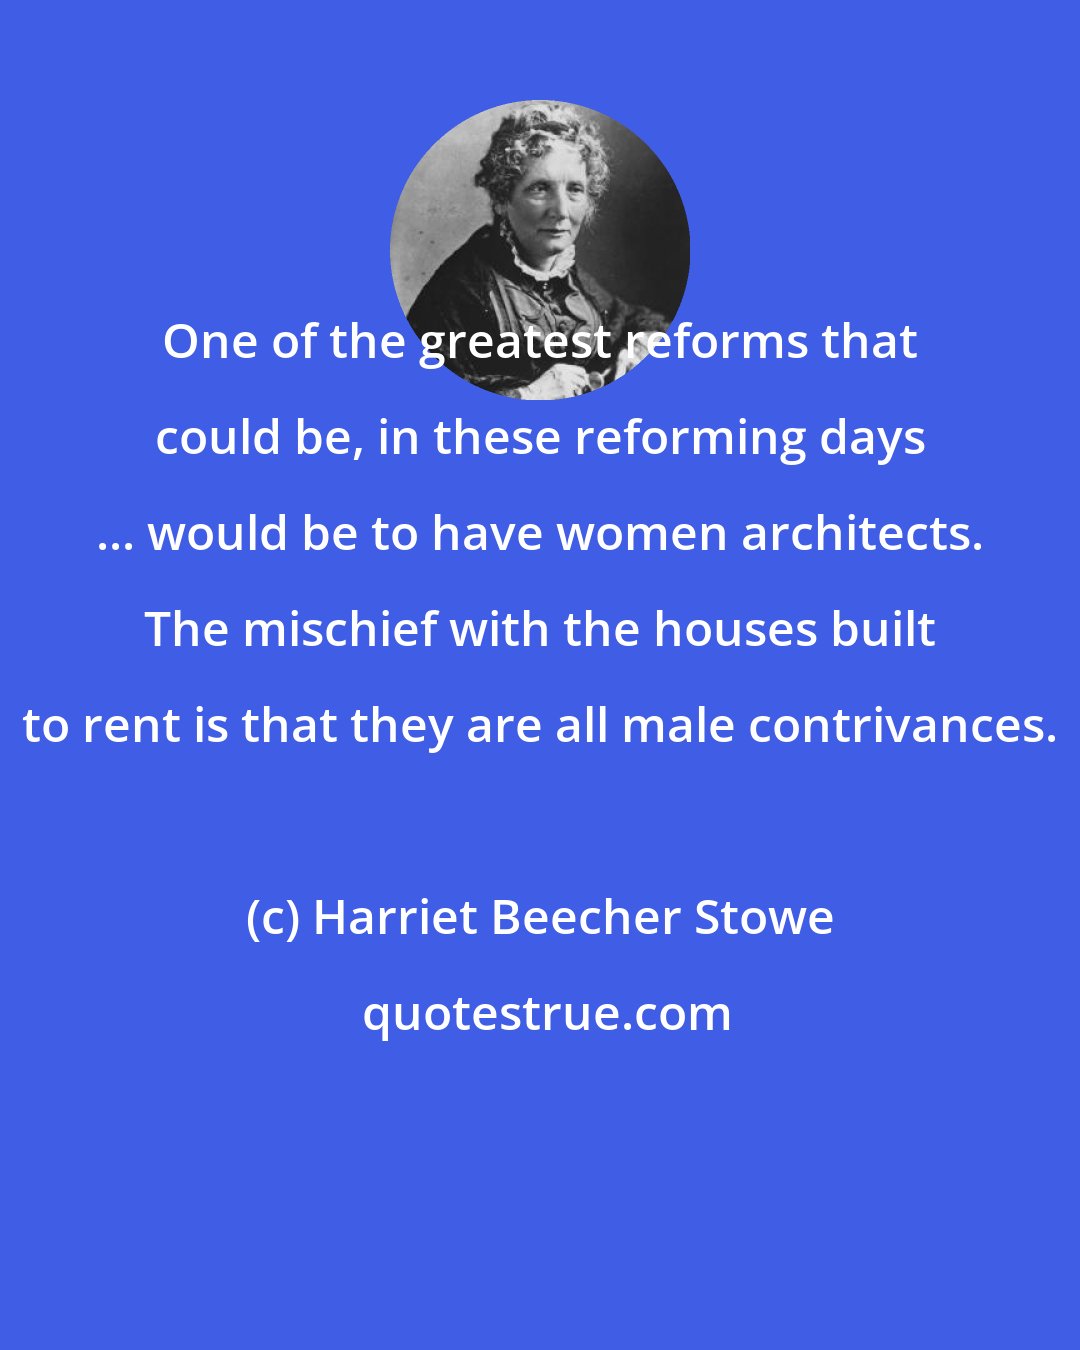 Harriet Beecher Stowe: One of the greatest reforms that could be, in these reforming days ... would be to have women architects. The mischief with the houses built to rent is that they are all male contrivances.